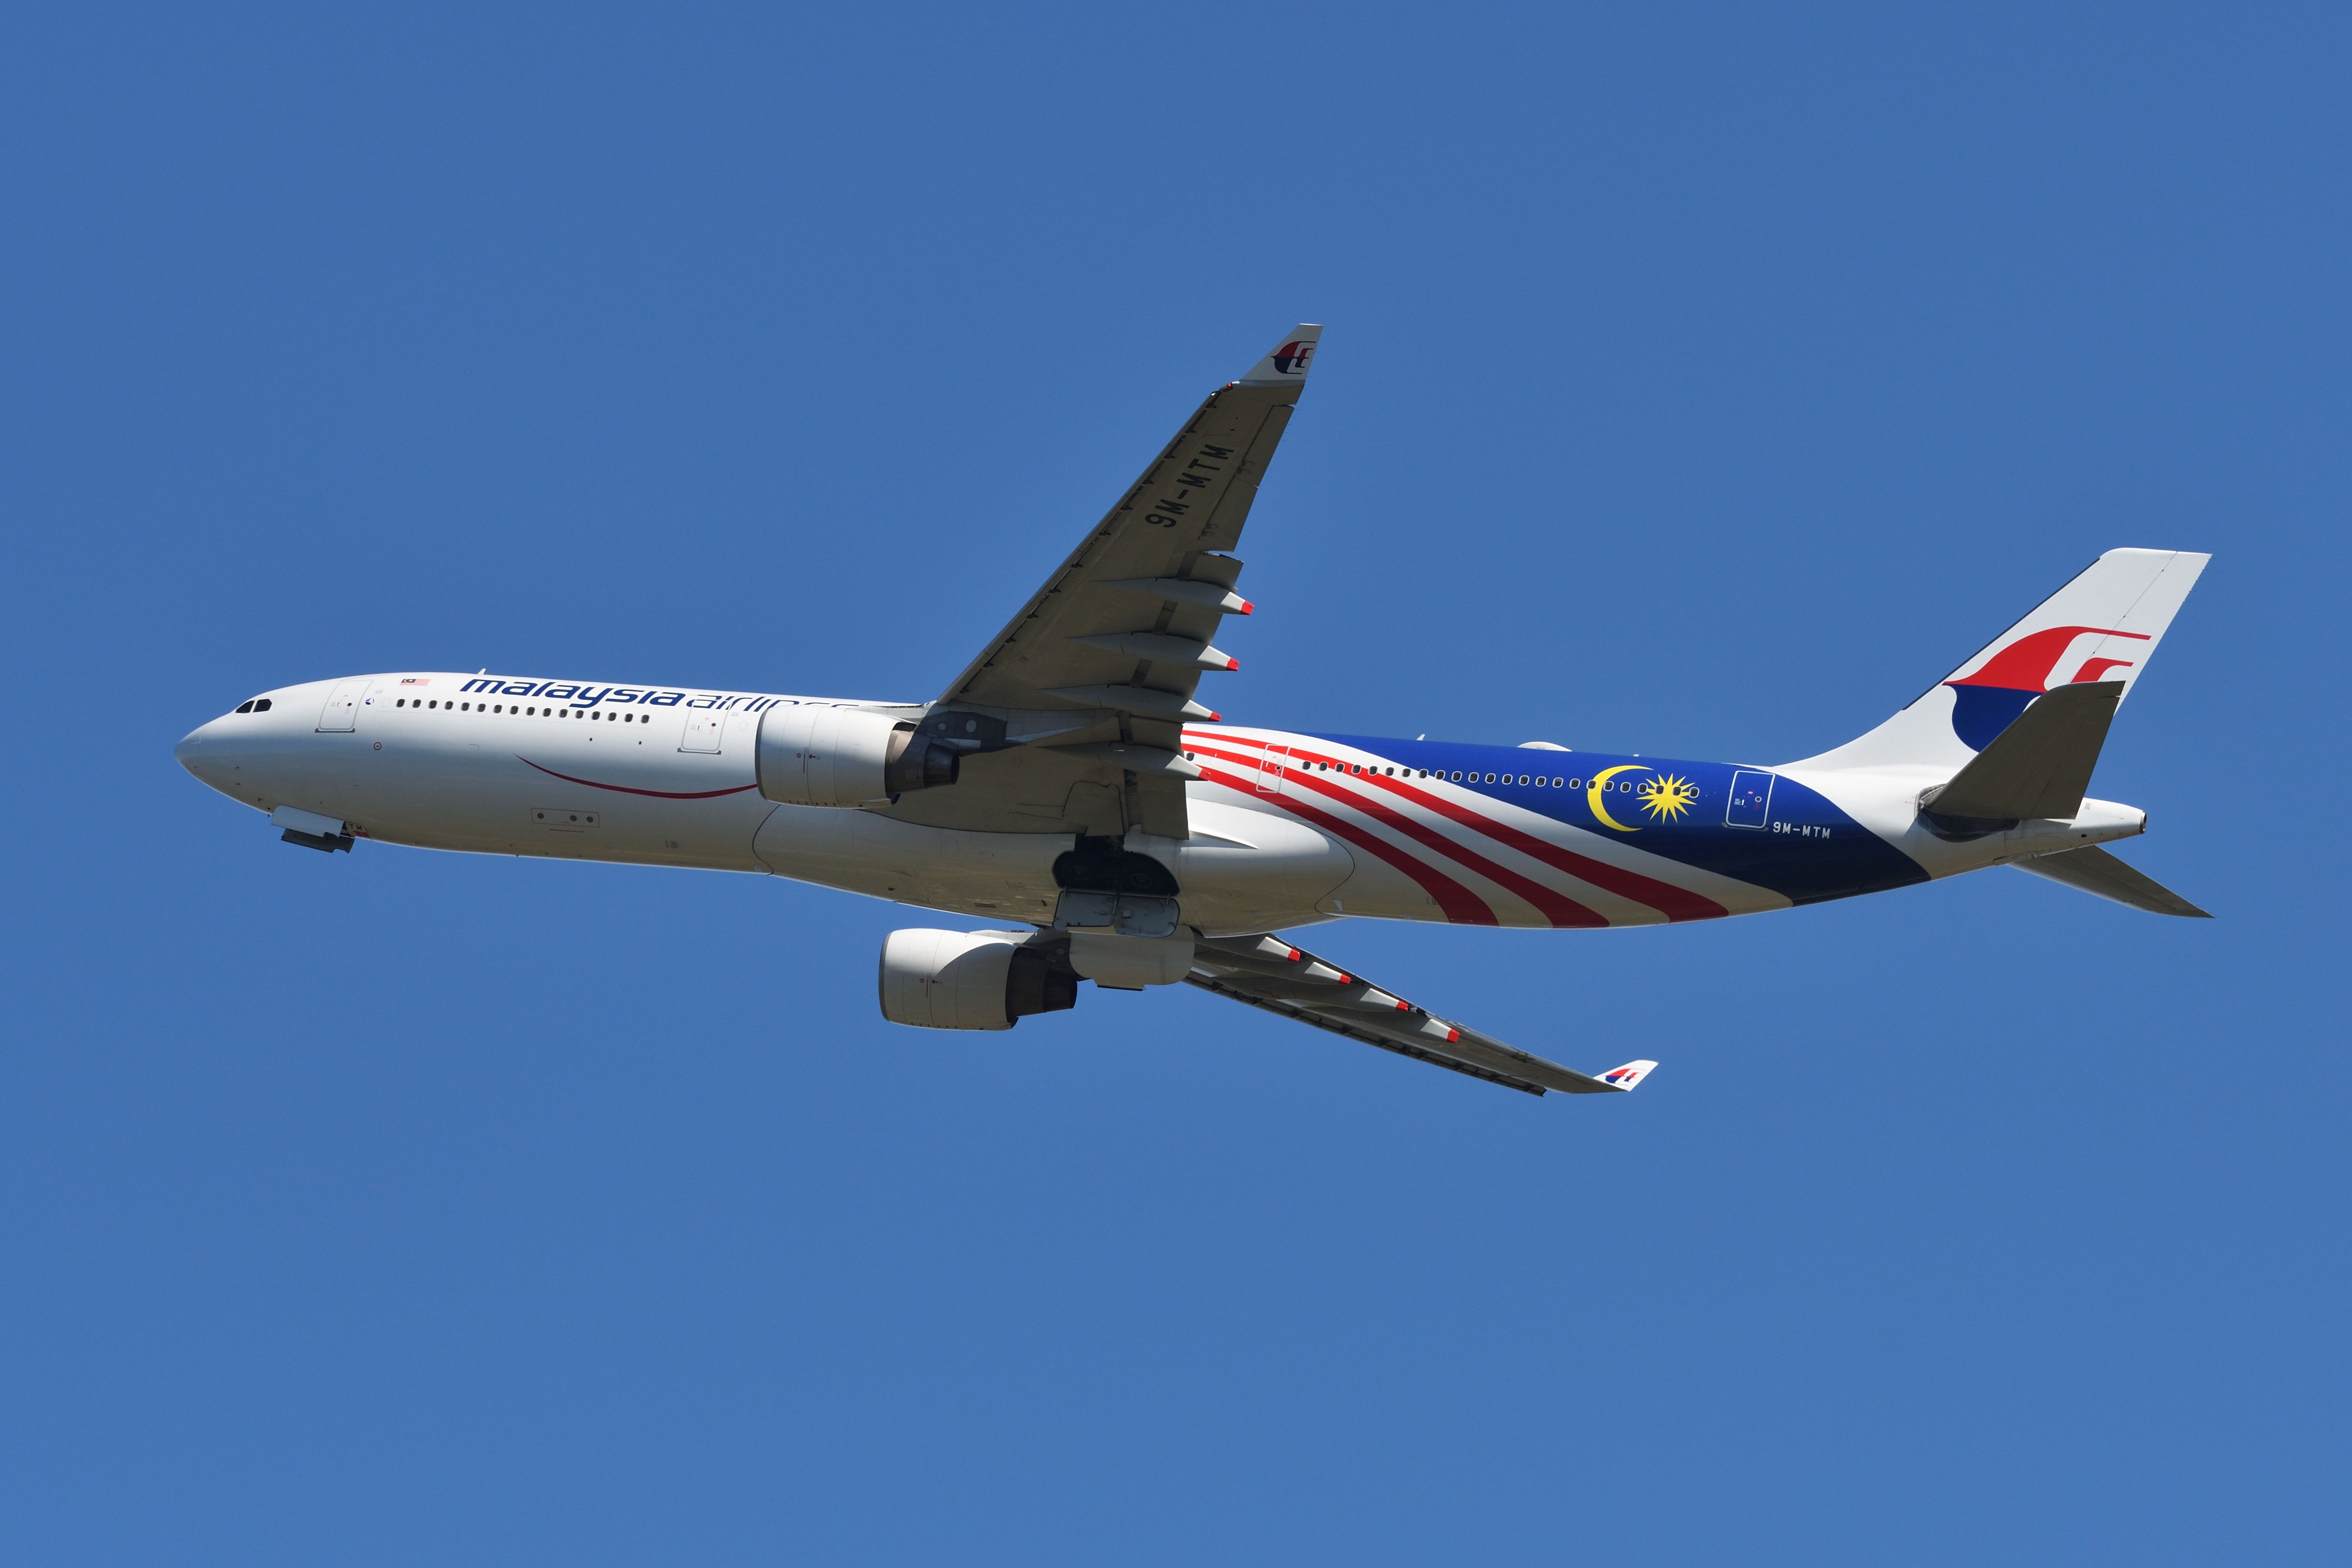 Malaysia Airlines A330 in the sky 